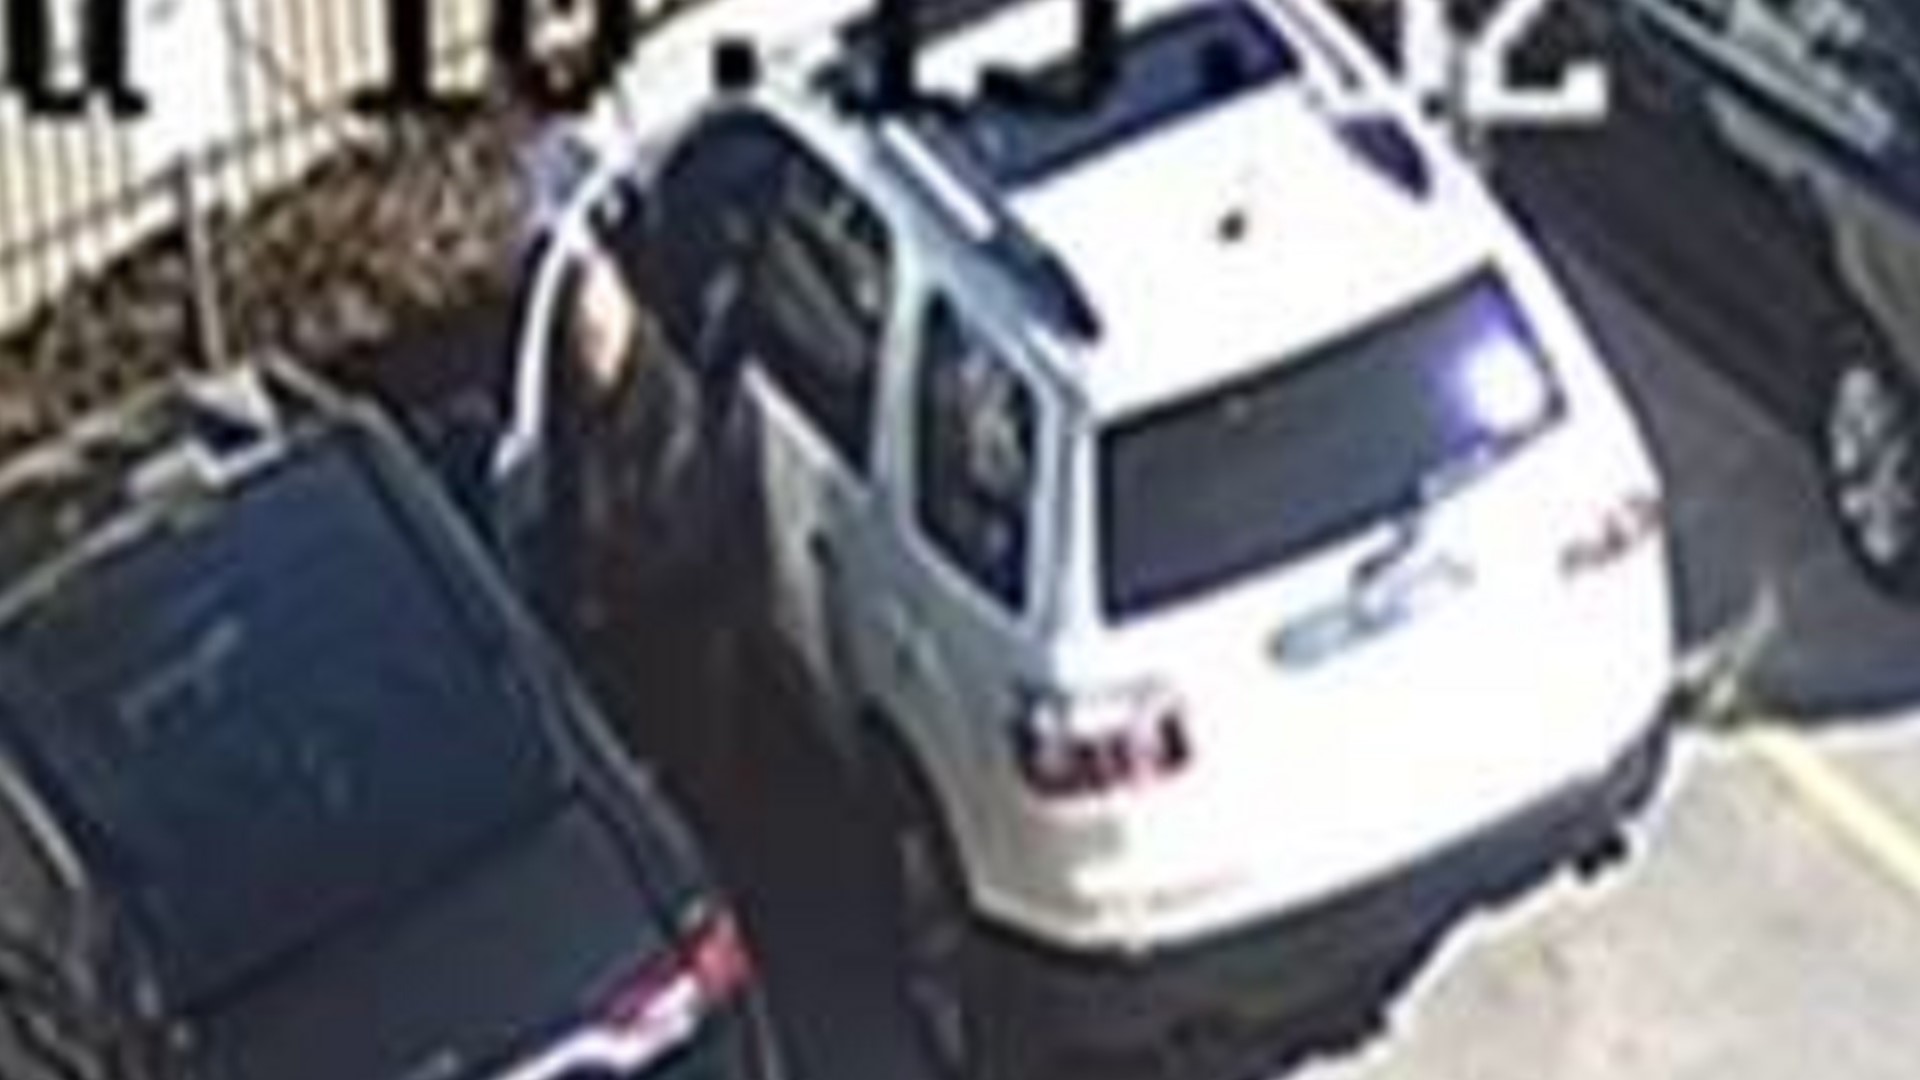 Investigators believe this suspect is involved in other thefts of catalytic converters in the downtown area.